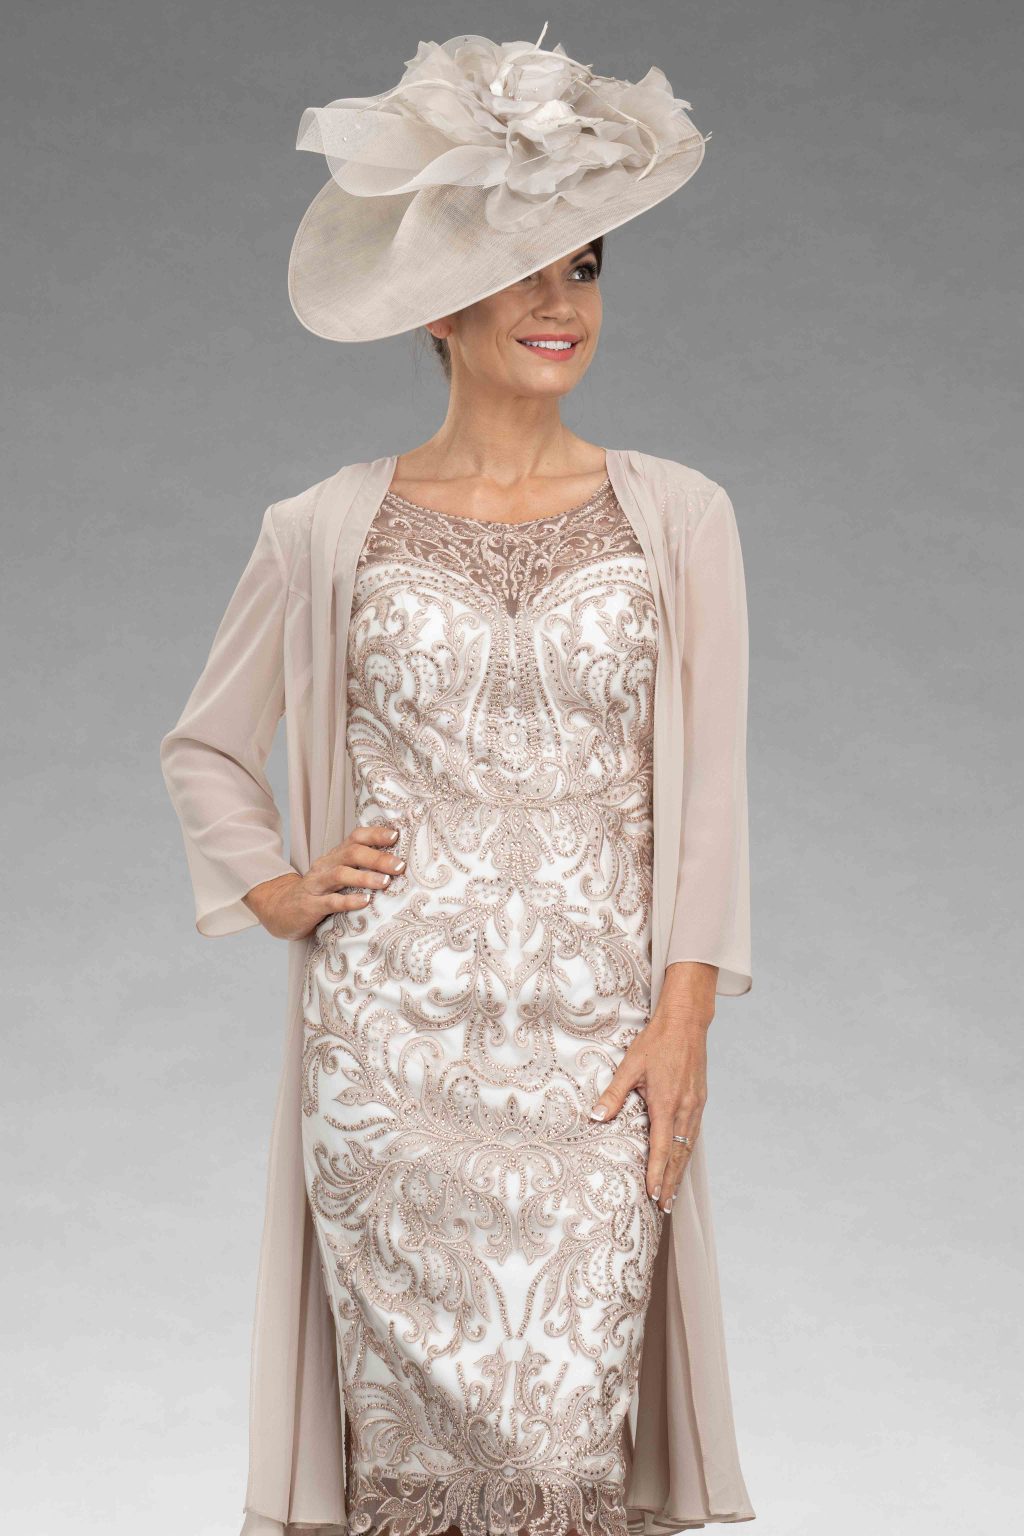 Short fitted beaded dress with chiffon coat. 008565 - Catherines of Partick